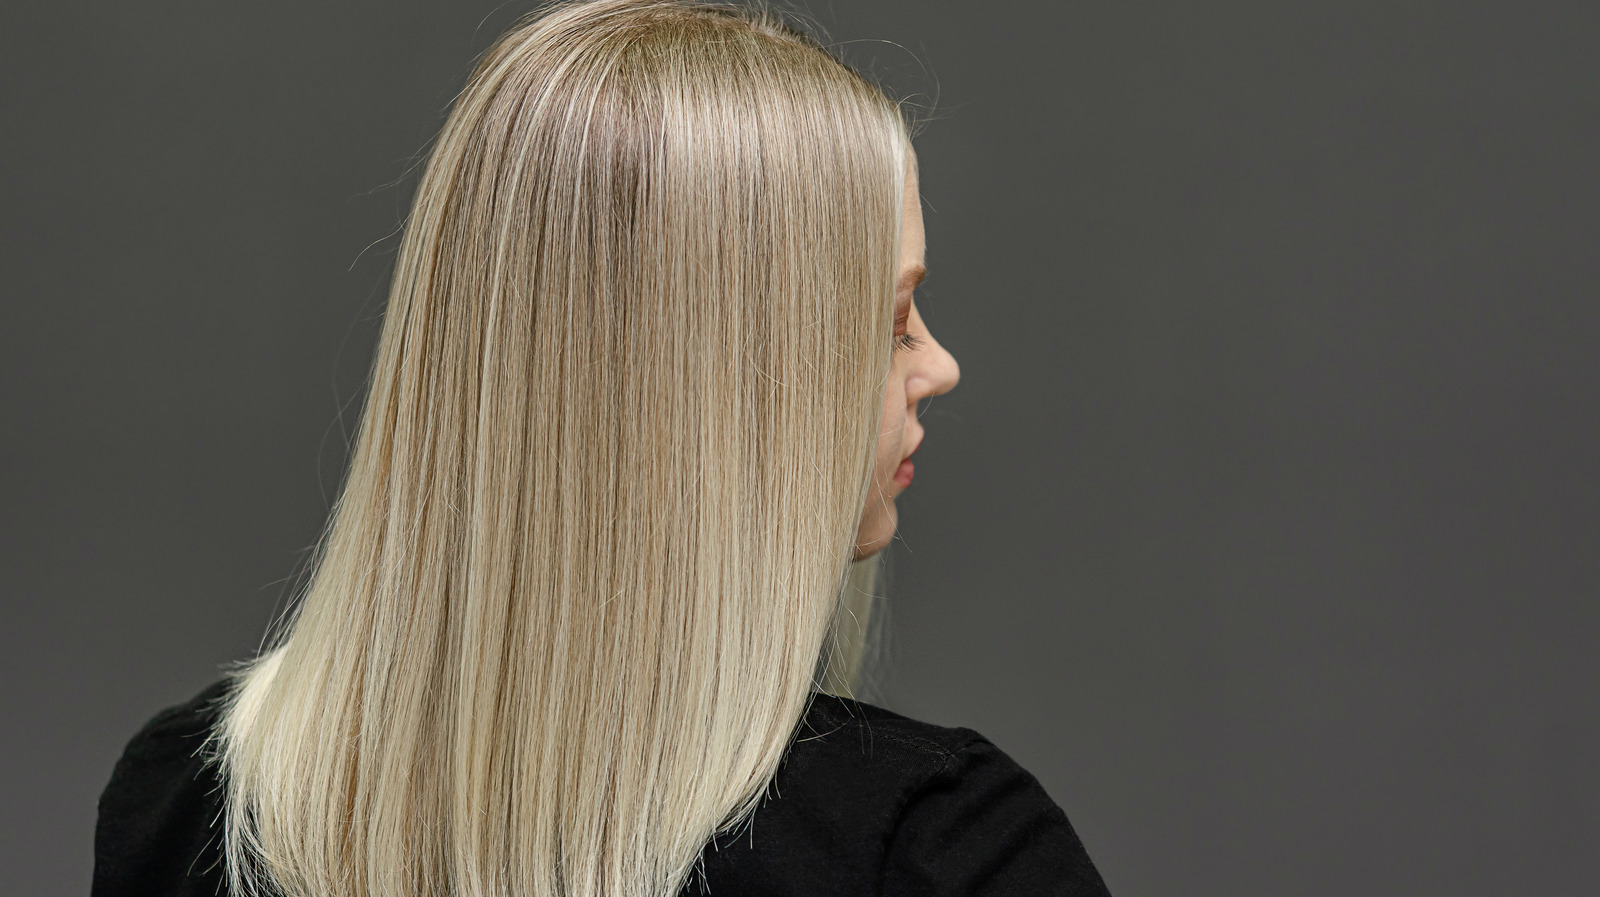 Can You Really Lighten Your Hair With Baking Soda?